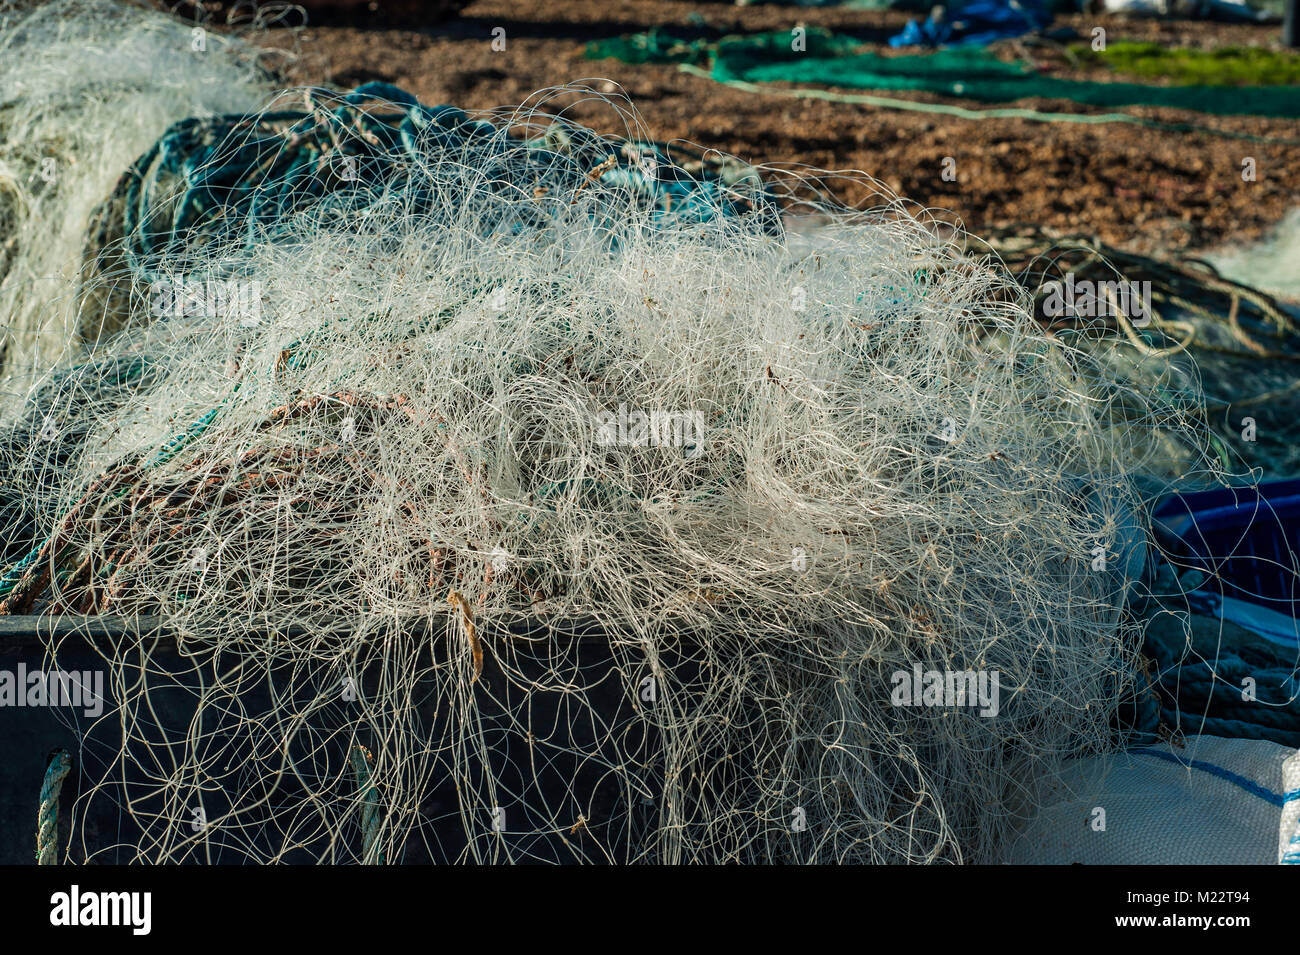 2,132 Tangled Fishing Line Images, Stock Photos, 3D objects